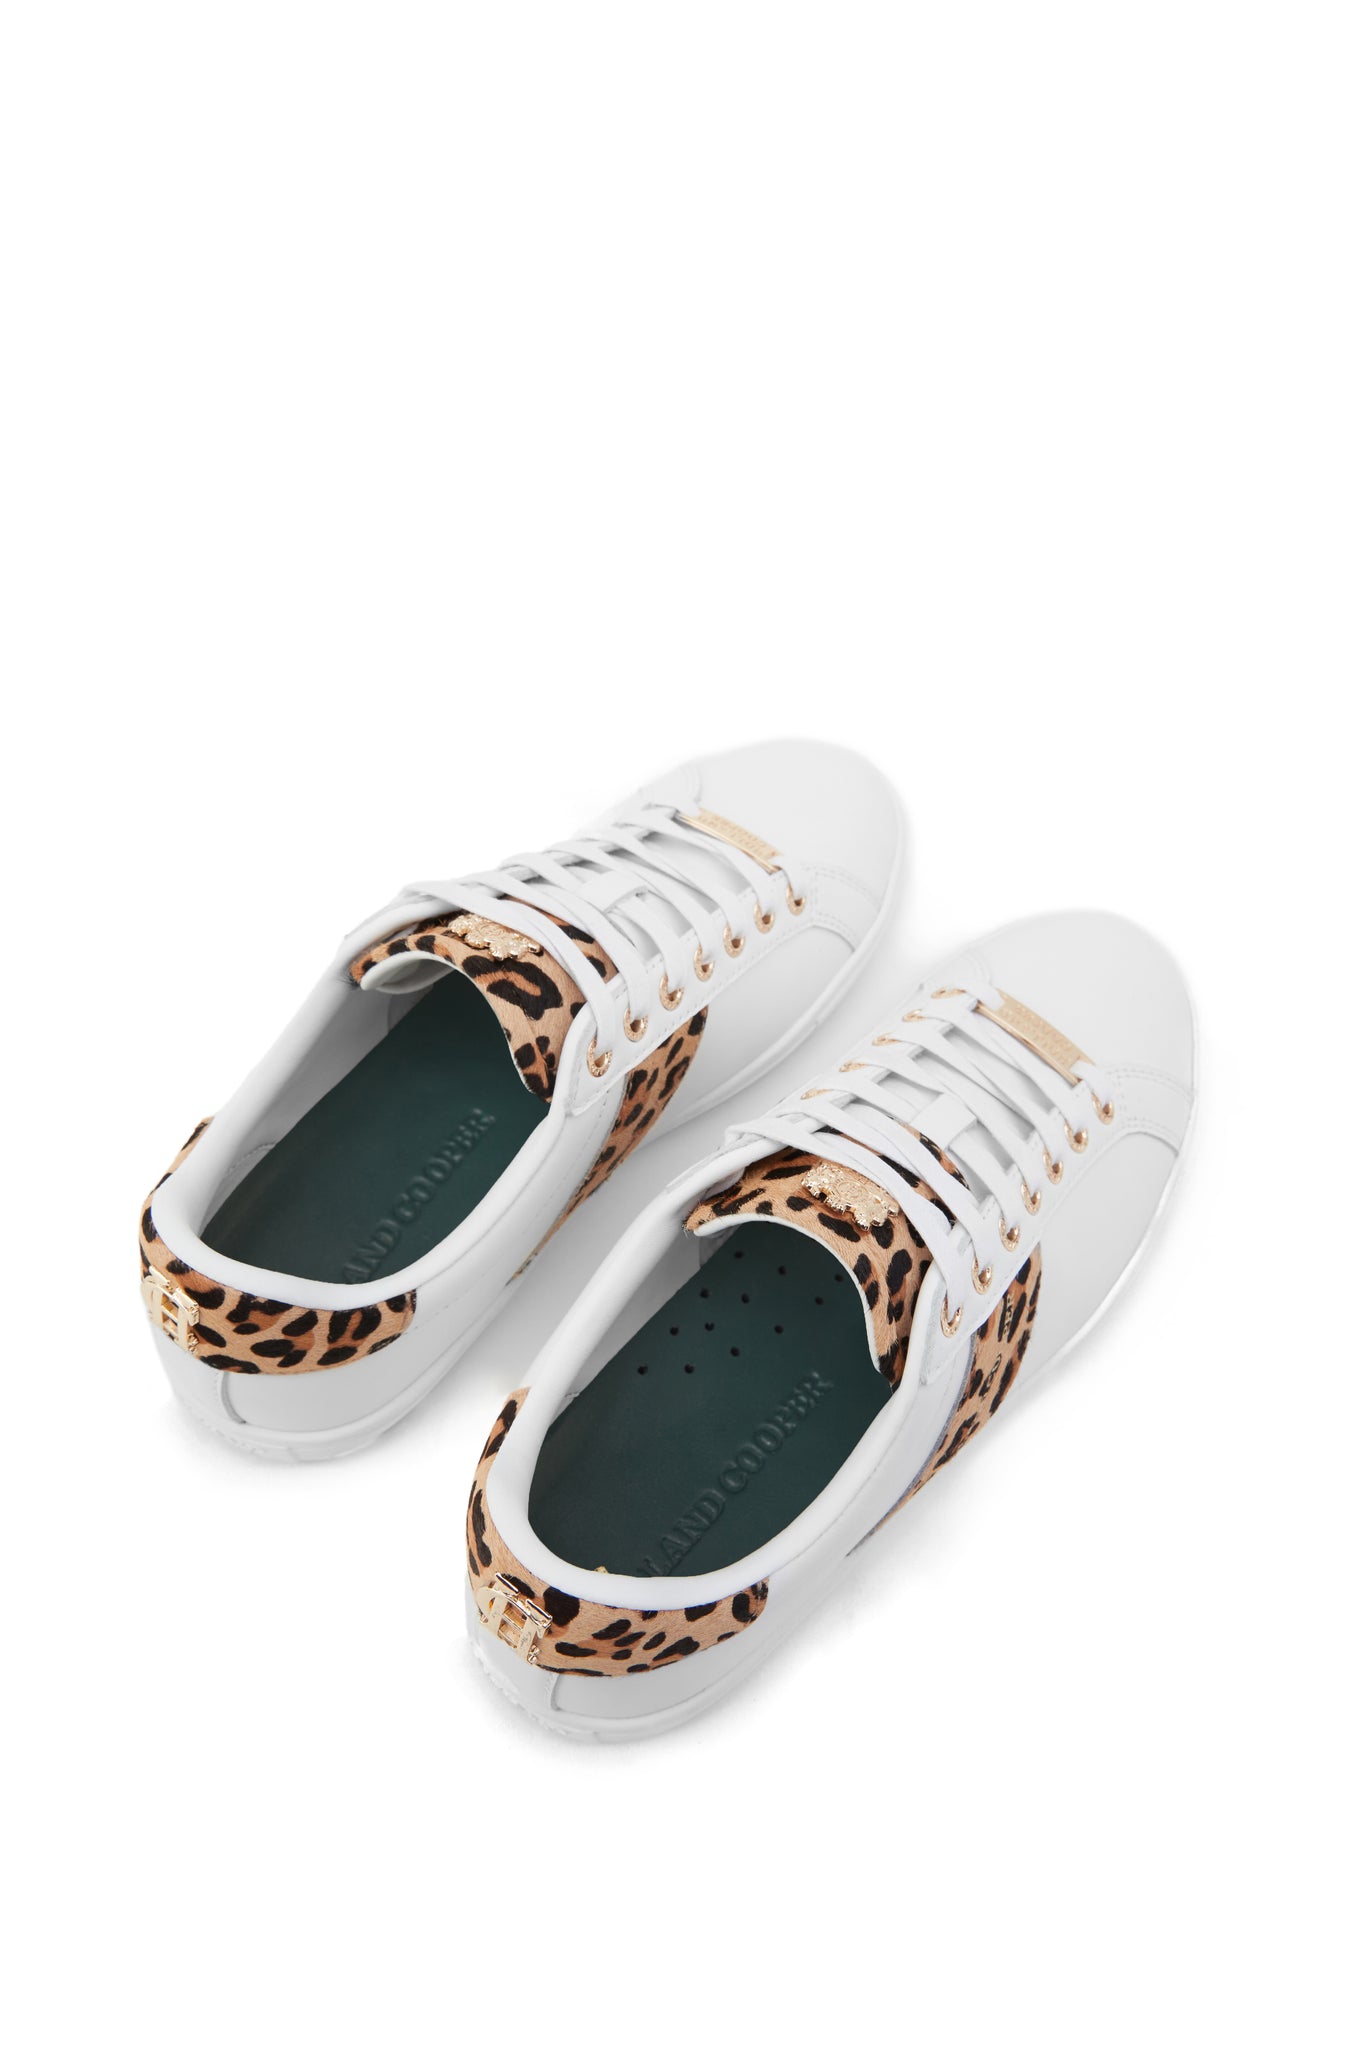 Birds eye view of white leather trainers with white laces detailed with a diagonal stripe of leopard print on the side with gold foil branding and a leopard print heel and tongue with gold hardware